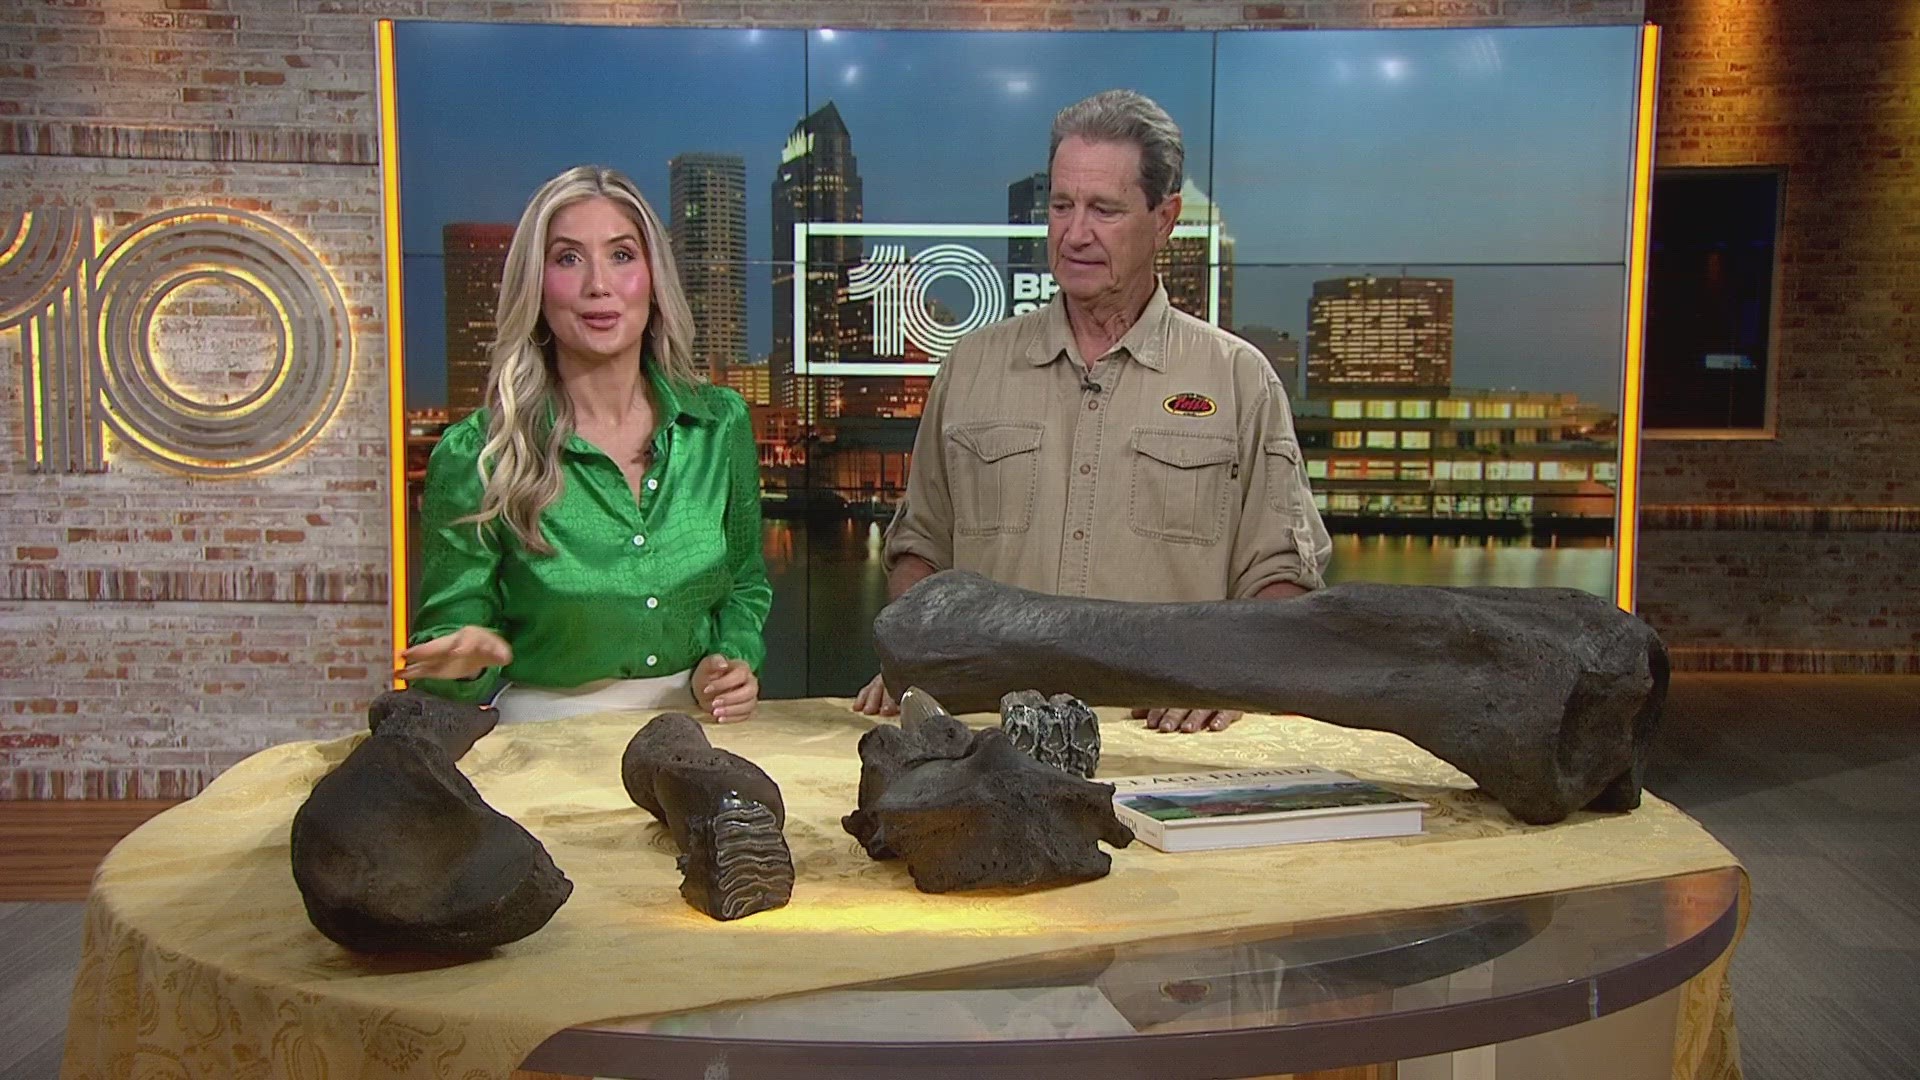 Fossil Fest is happening March 18-19 at the Florida State Fairgrounds.